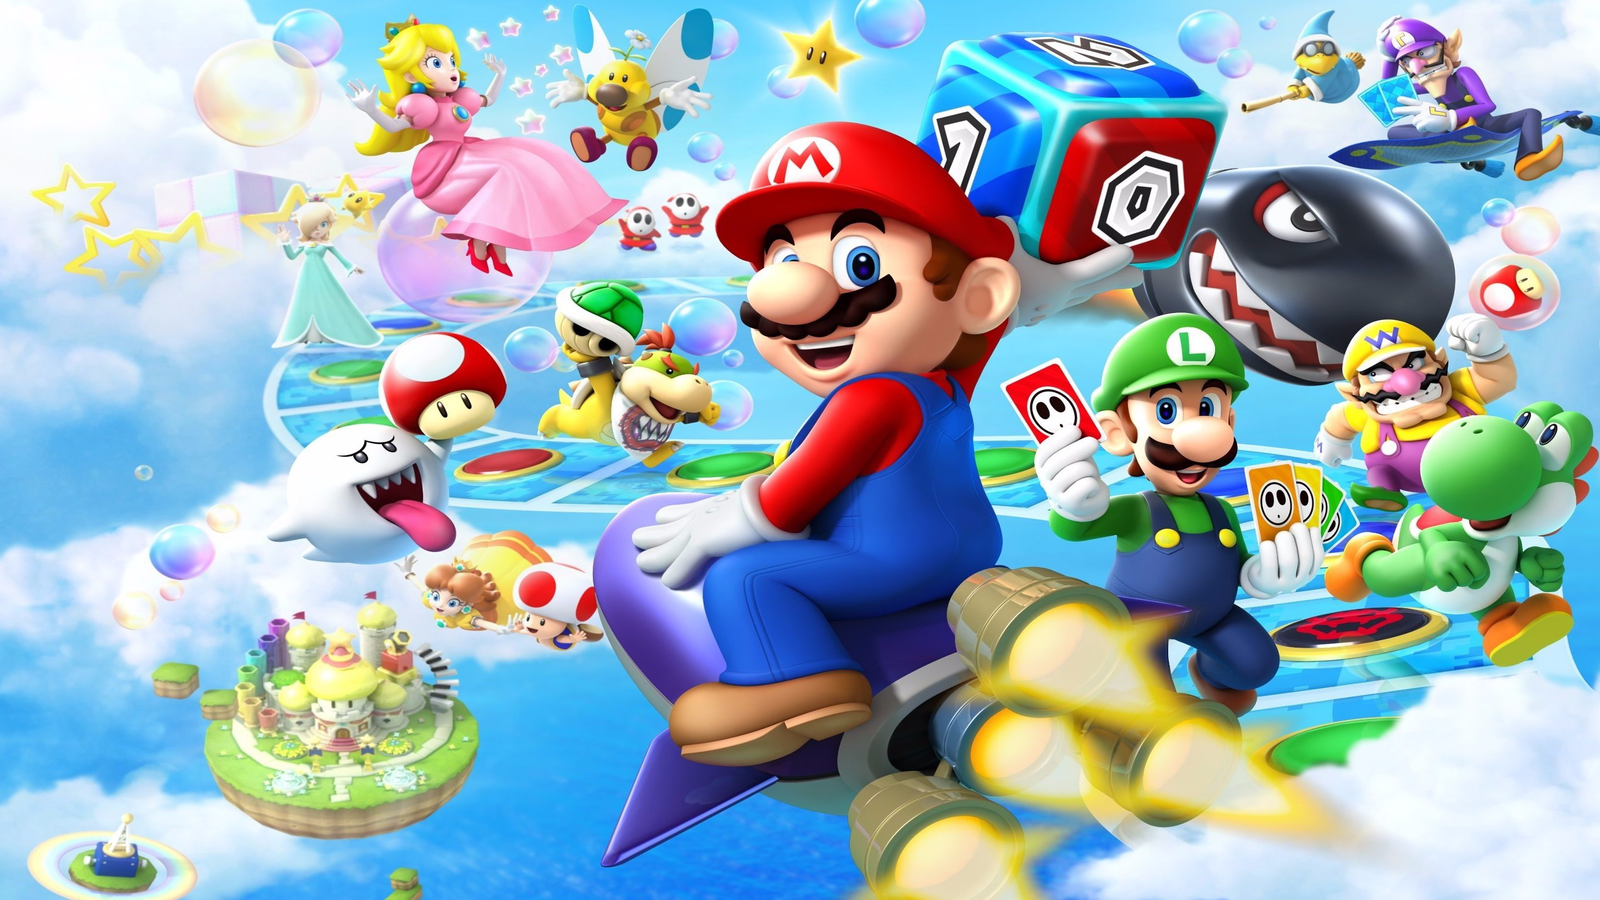 https://assetsio.reedpopcdn.com/mario-party-10-review-1426511331429.jpg?width=1600&height=900&fit=crop&quality=100&format=png&enable=upscale&auto=webp